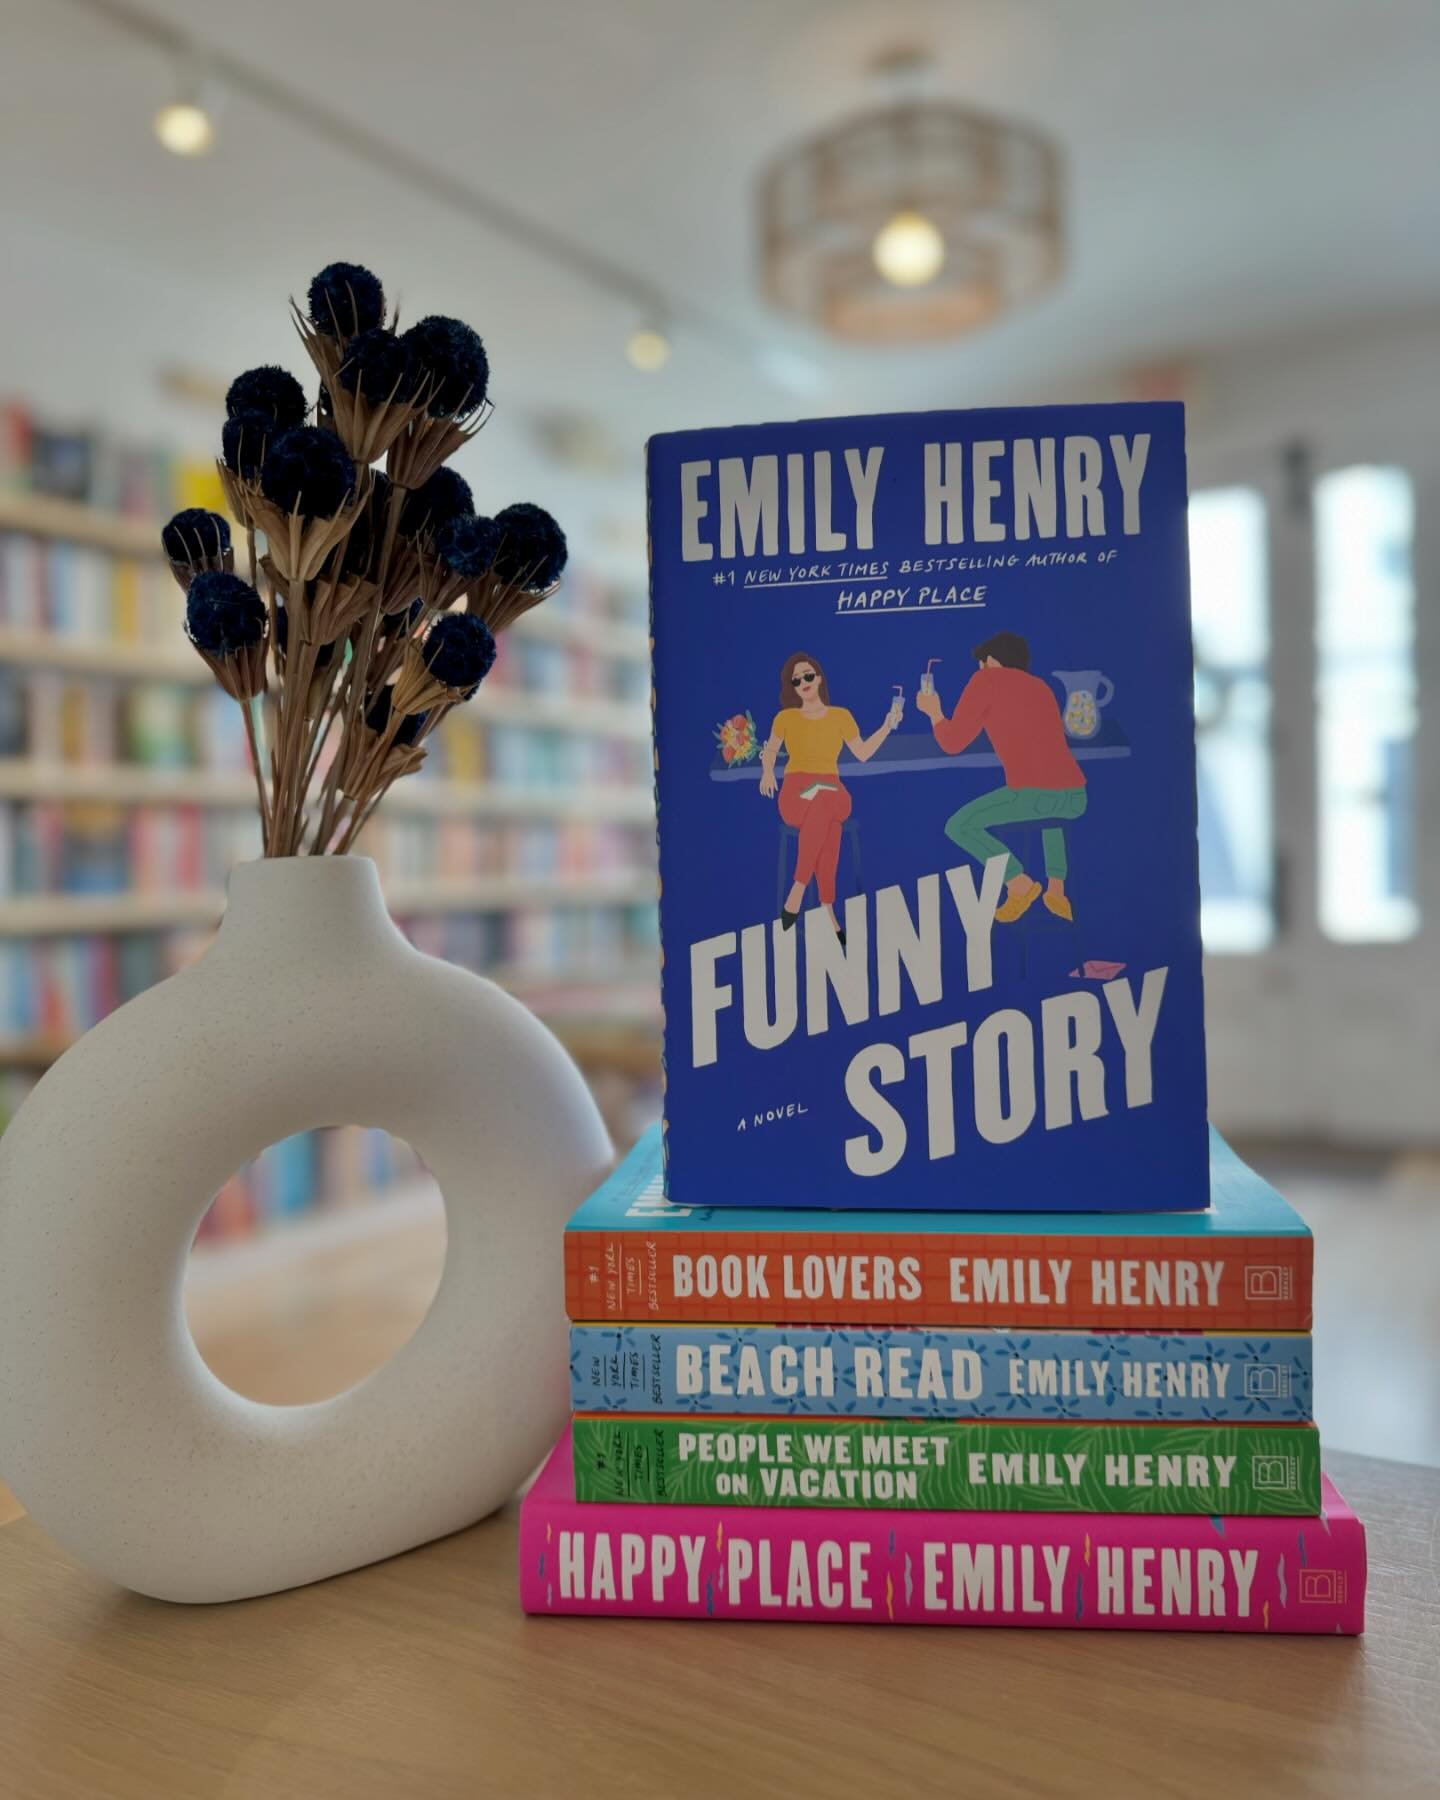 New book Tuesday! 📘

Emily Henry fans rejoice! Her much-anticipated new novel, Funny Story, is available today. This delightful opposites attract rom-com is a perfect choice for those upcoming Marblehead beach days. Copies available in-store! ☀️

Op